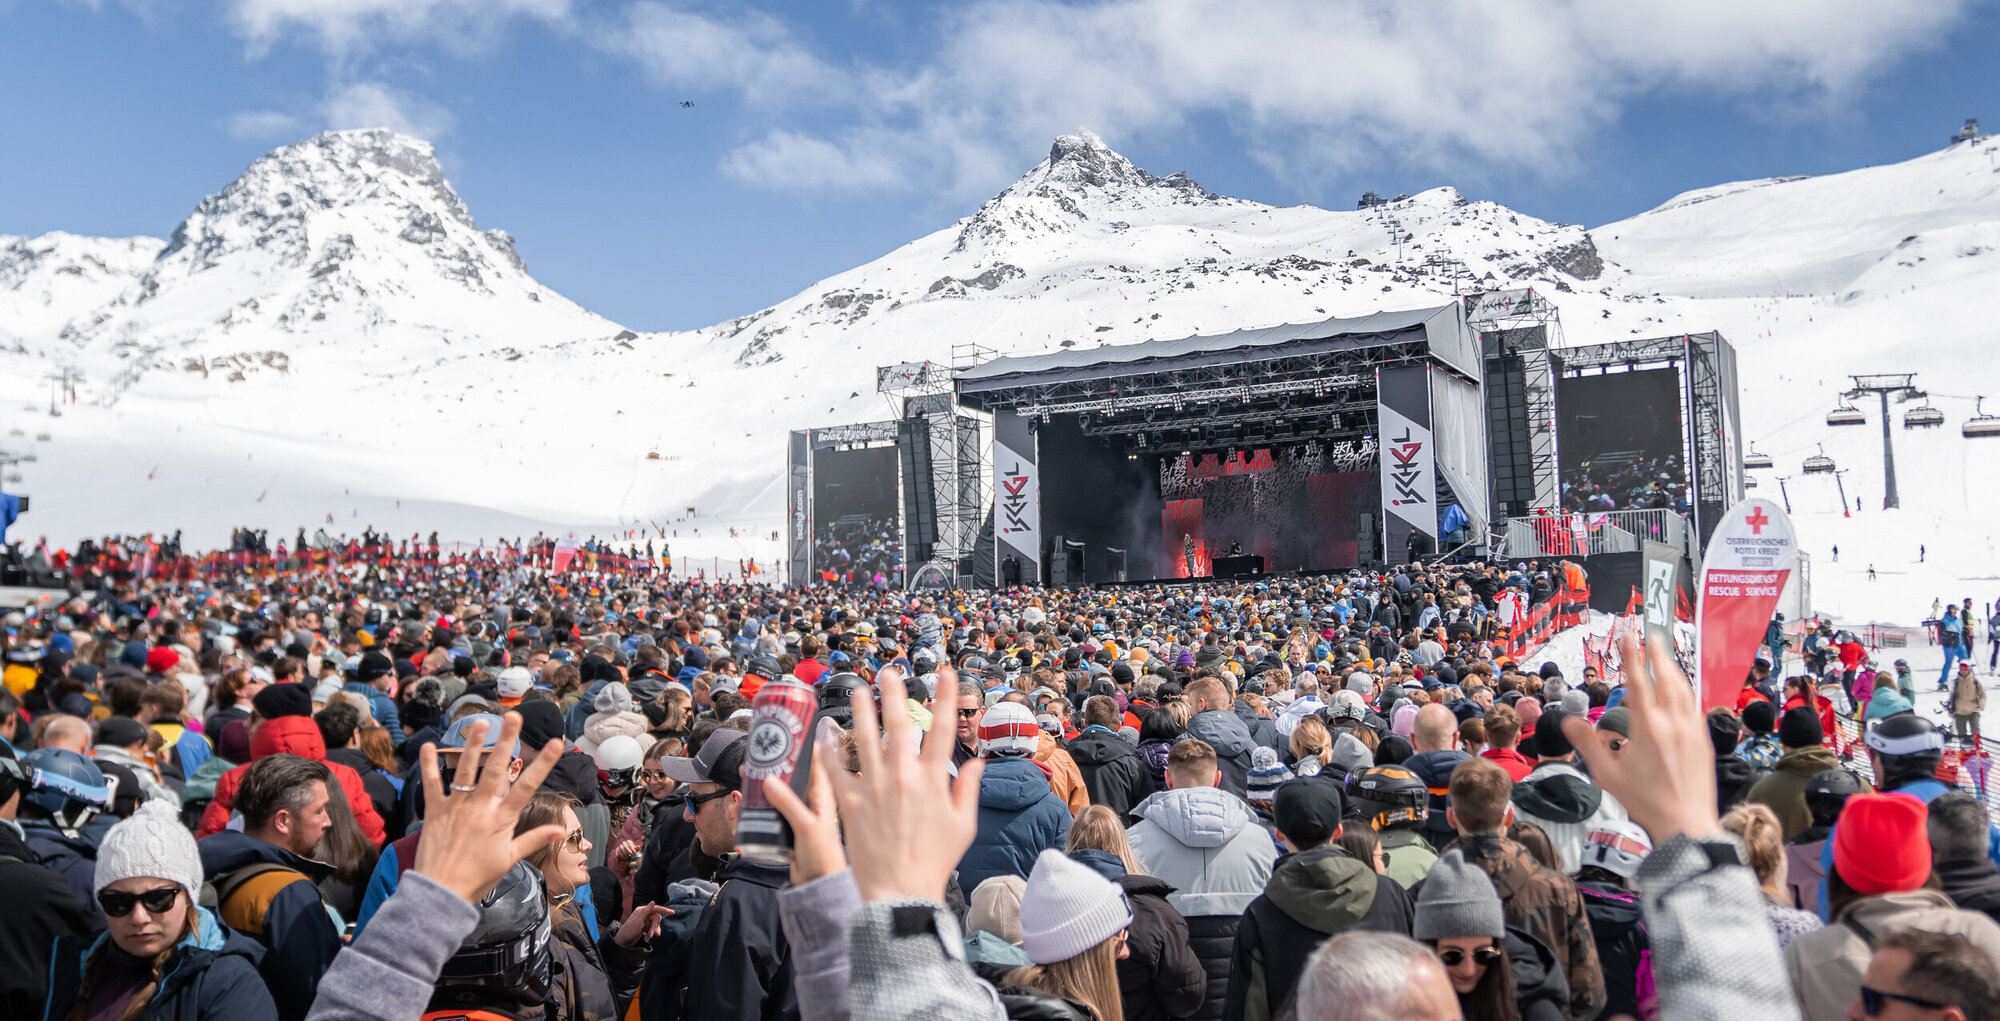   Events in Ischgl